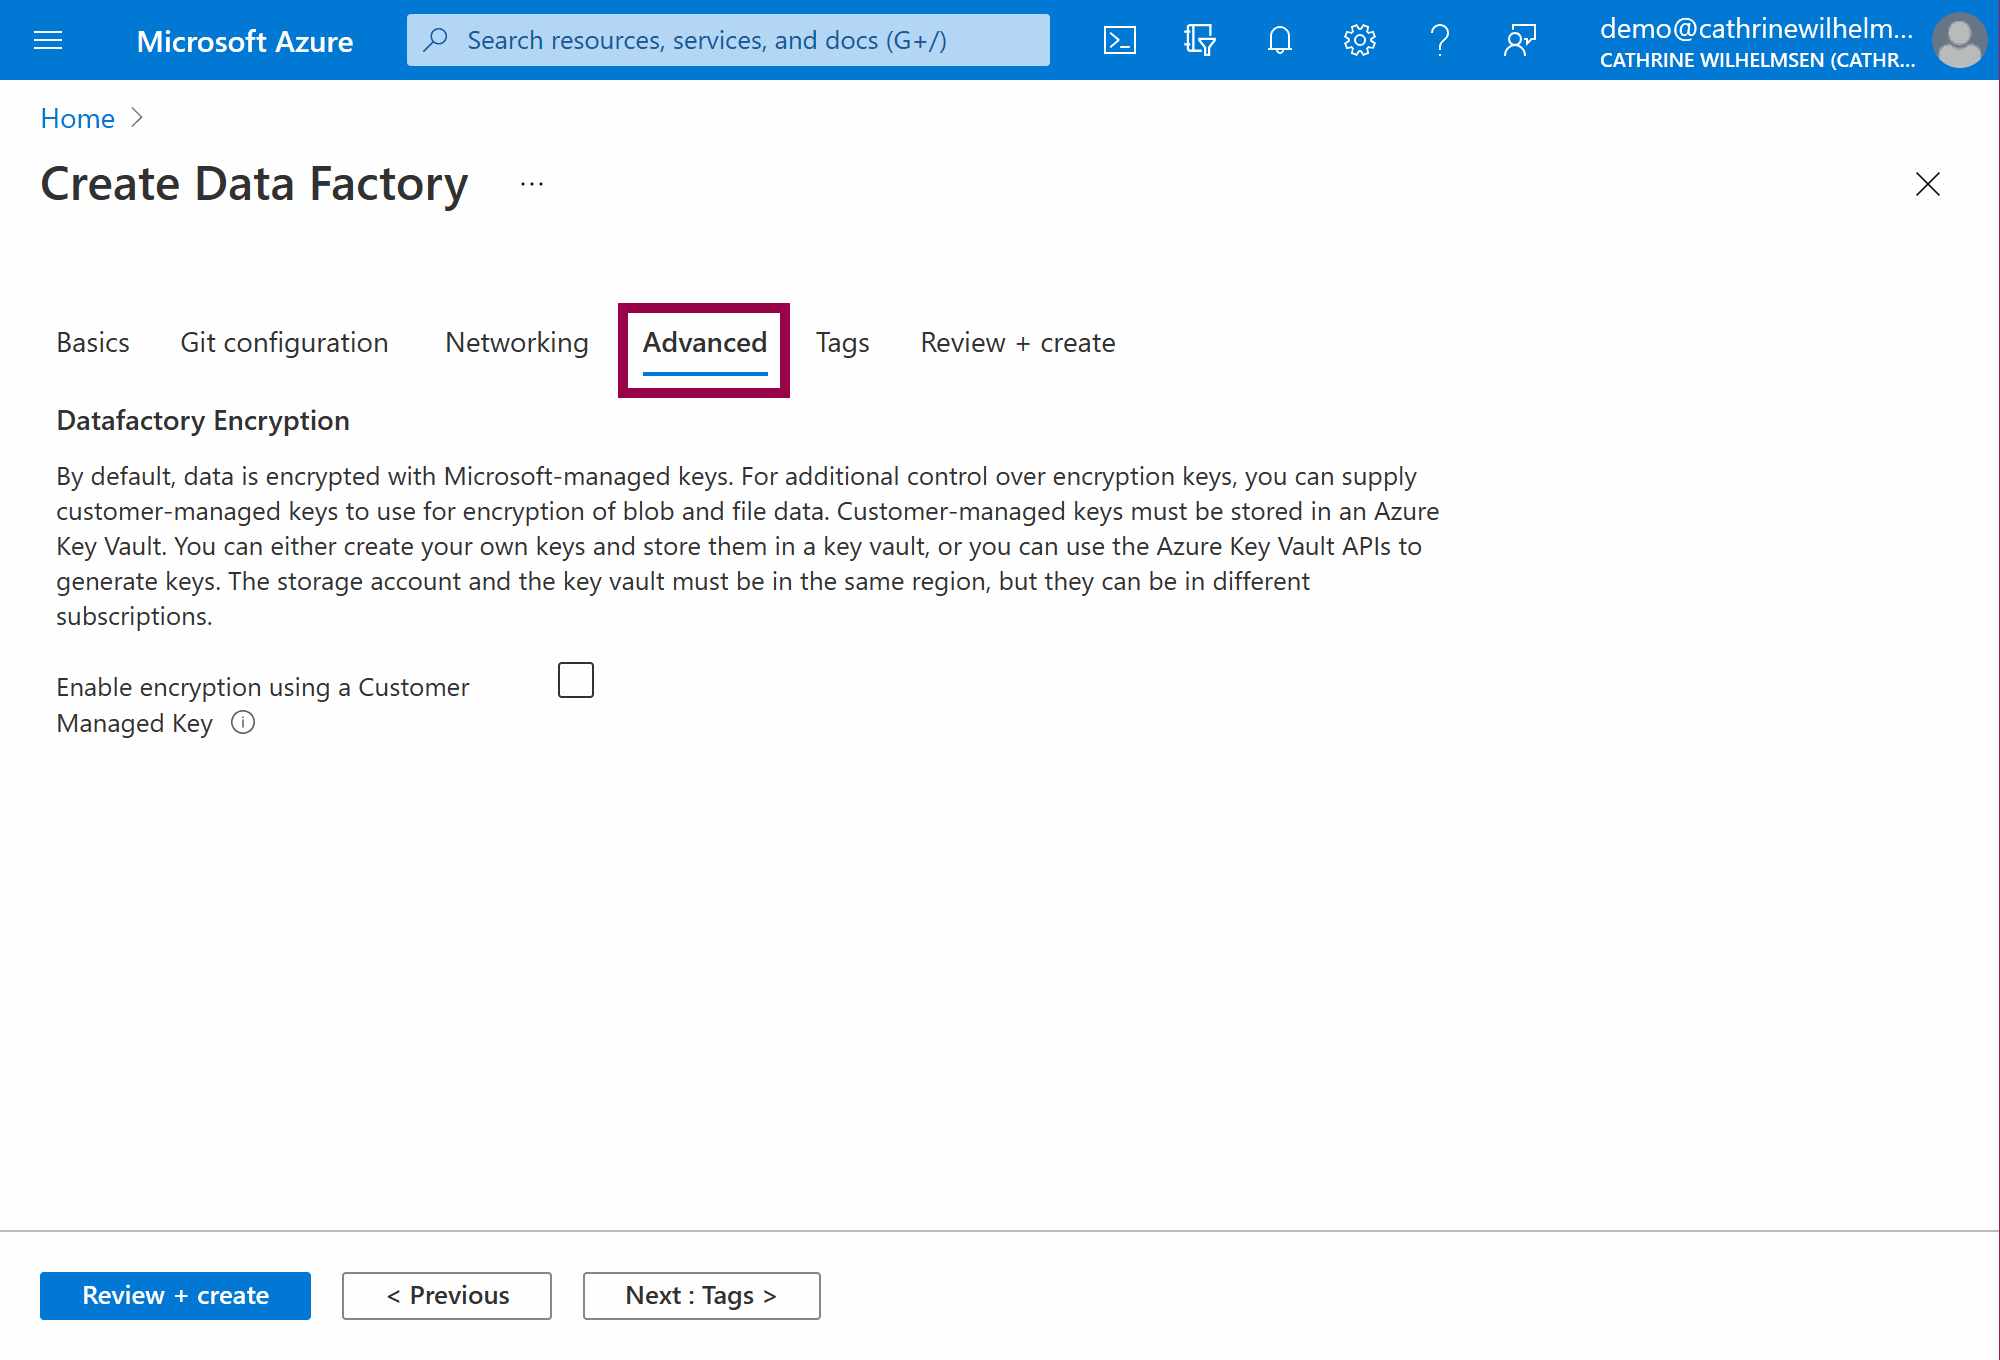 Screenshot of the Create Data Factory: Advanced page in the Azure Portal